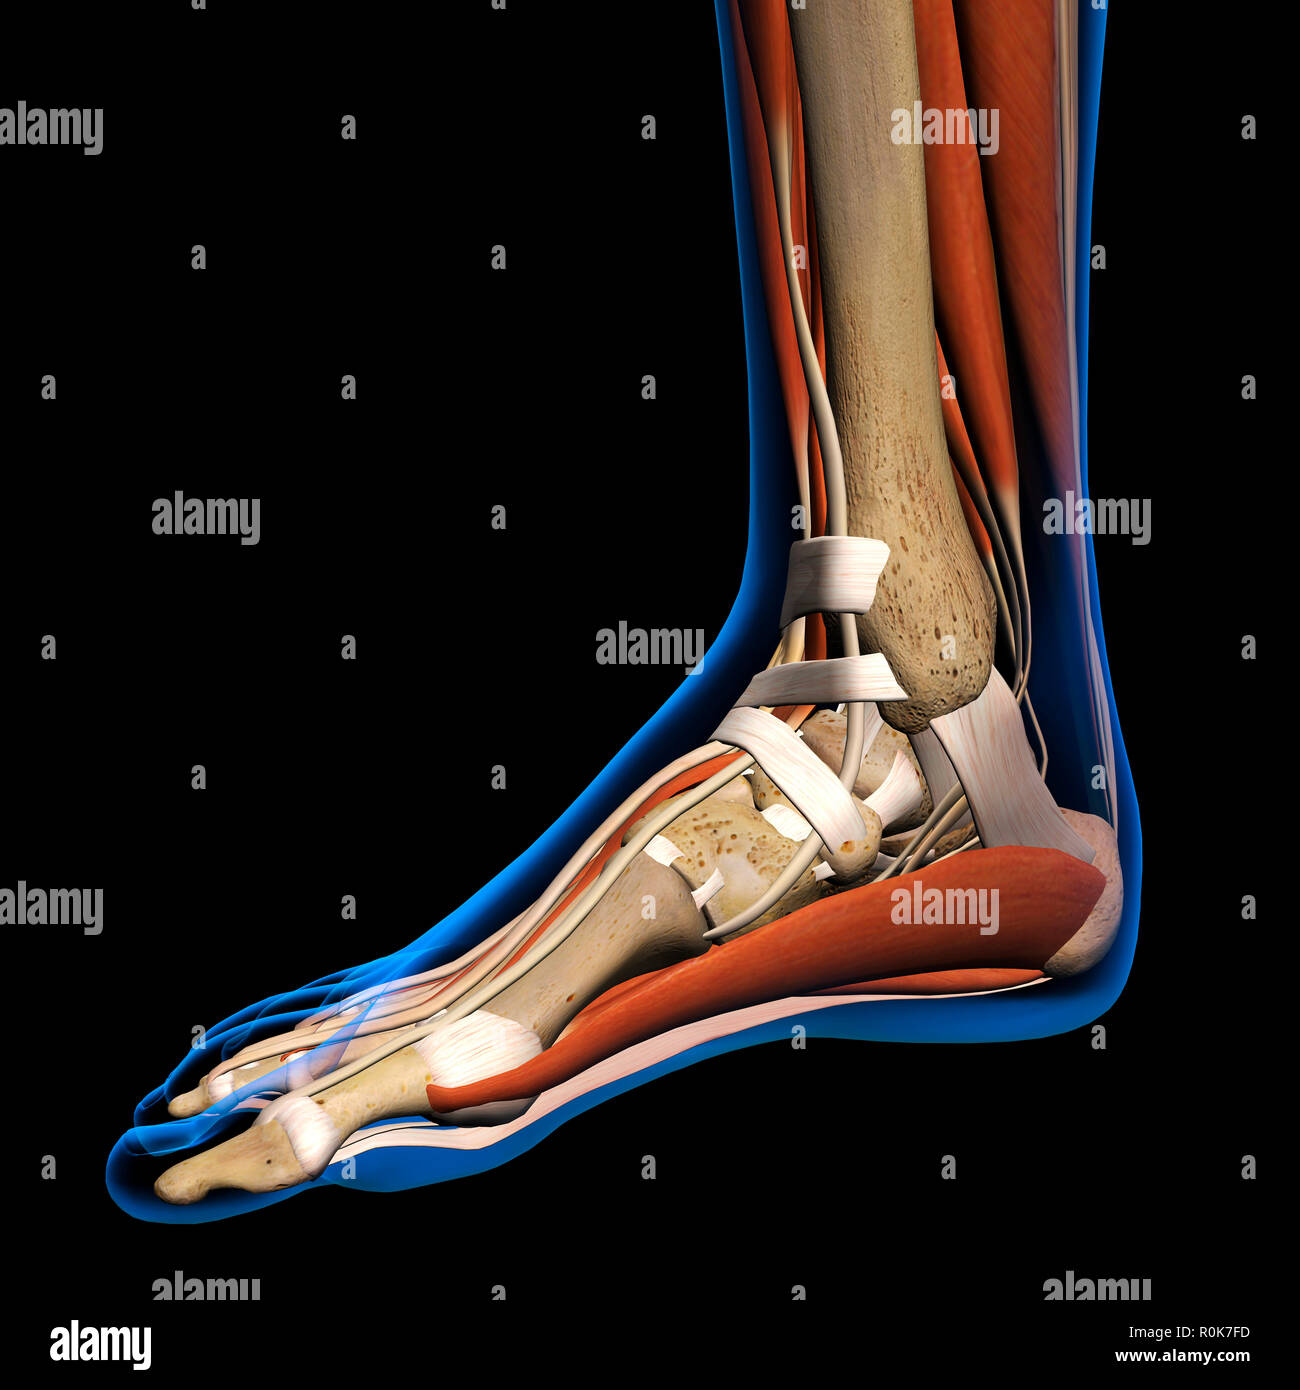 X-ray medial view of a woman's foot. Stock Photo